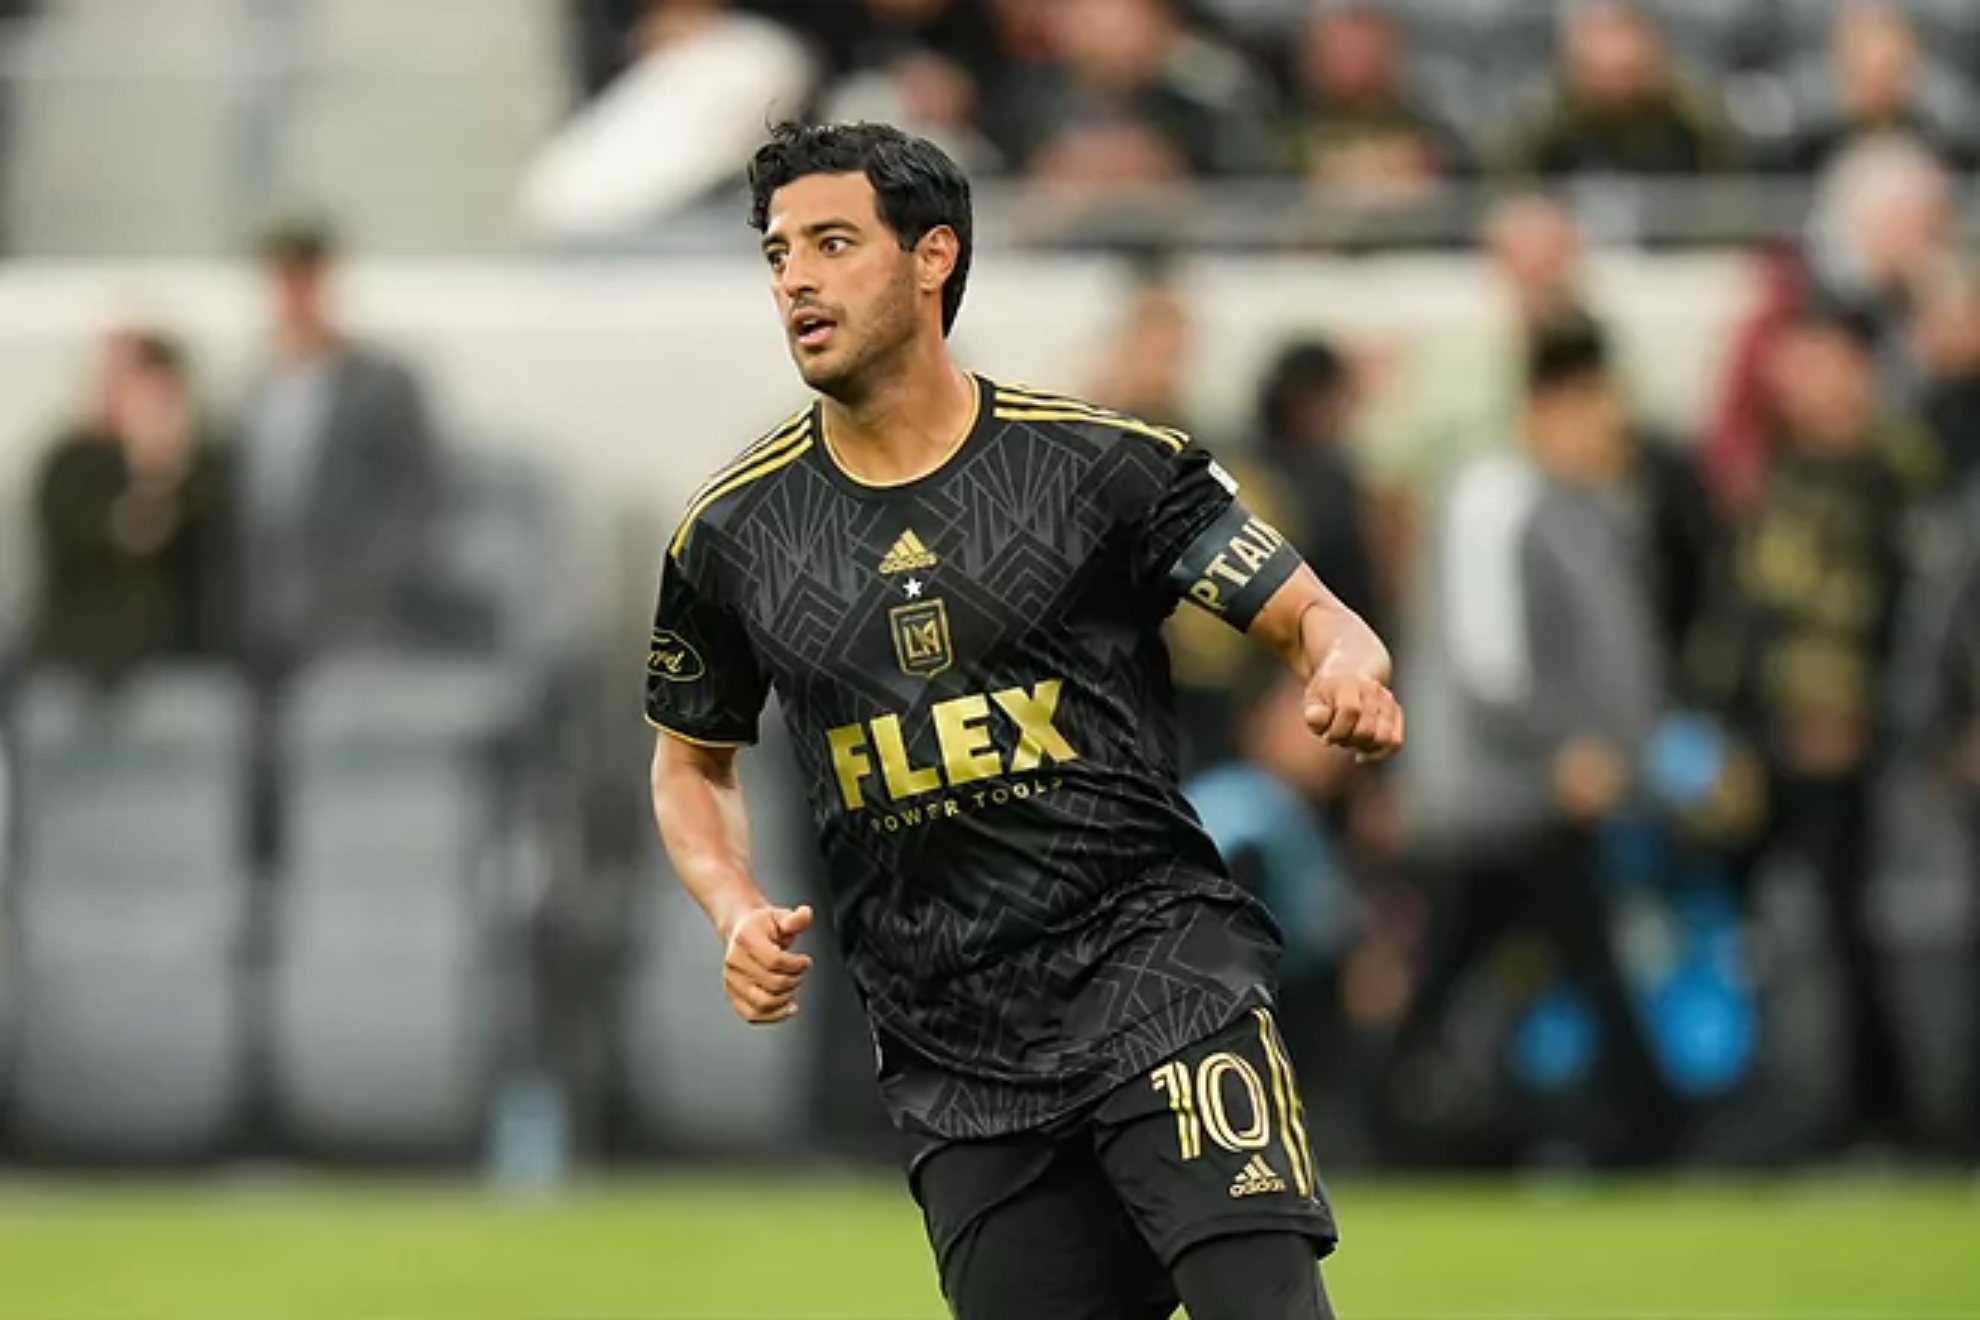 LAFC's Carlos Vela goes head to head with Sporting's Alan Pulido to prove who's top-scoring Mexican